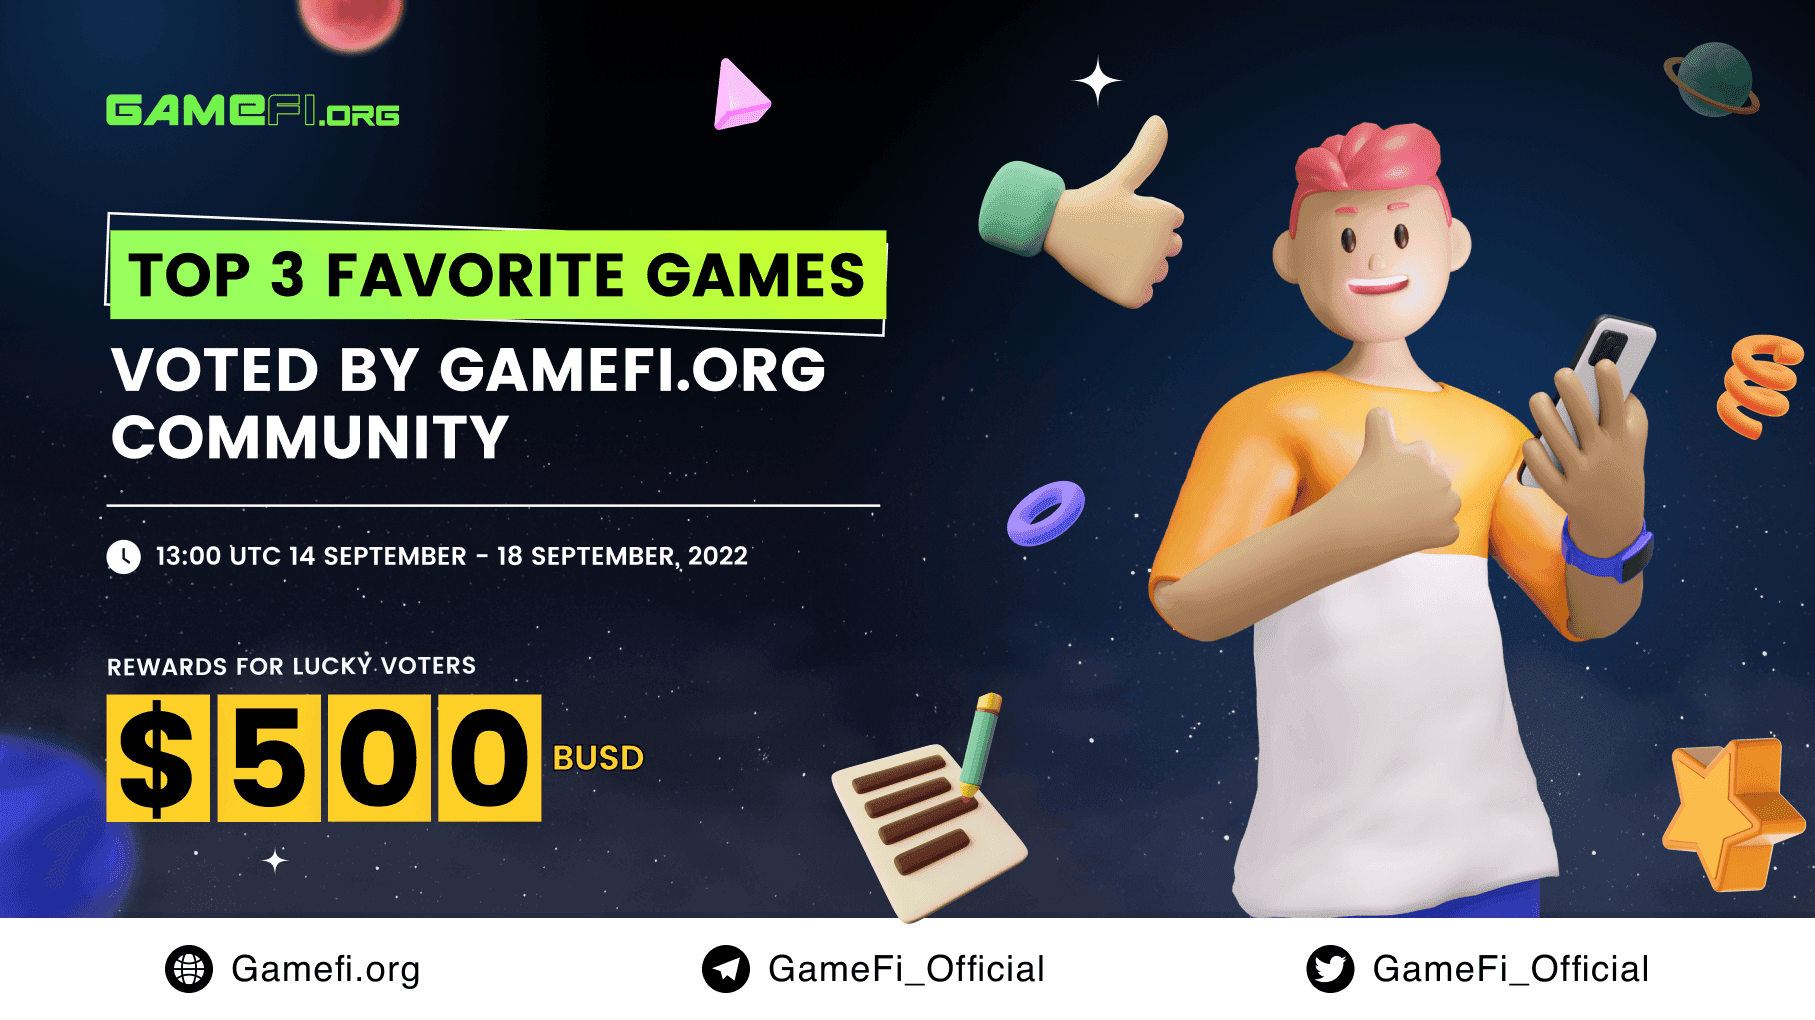 [CATVENTURE SATELLITE EVENT] Top 3 Favorite Games voted by Community